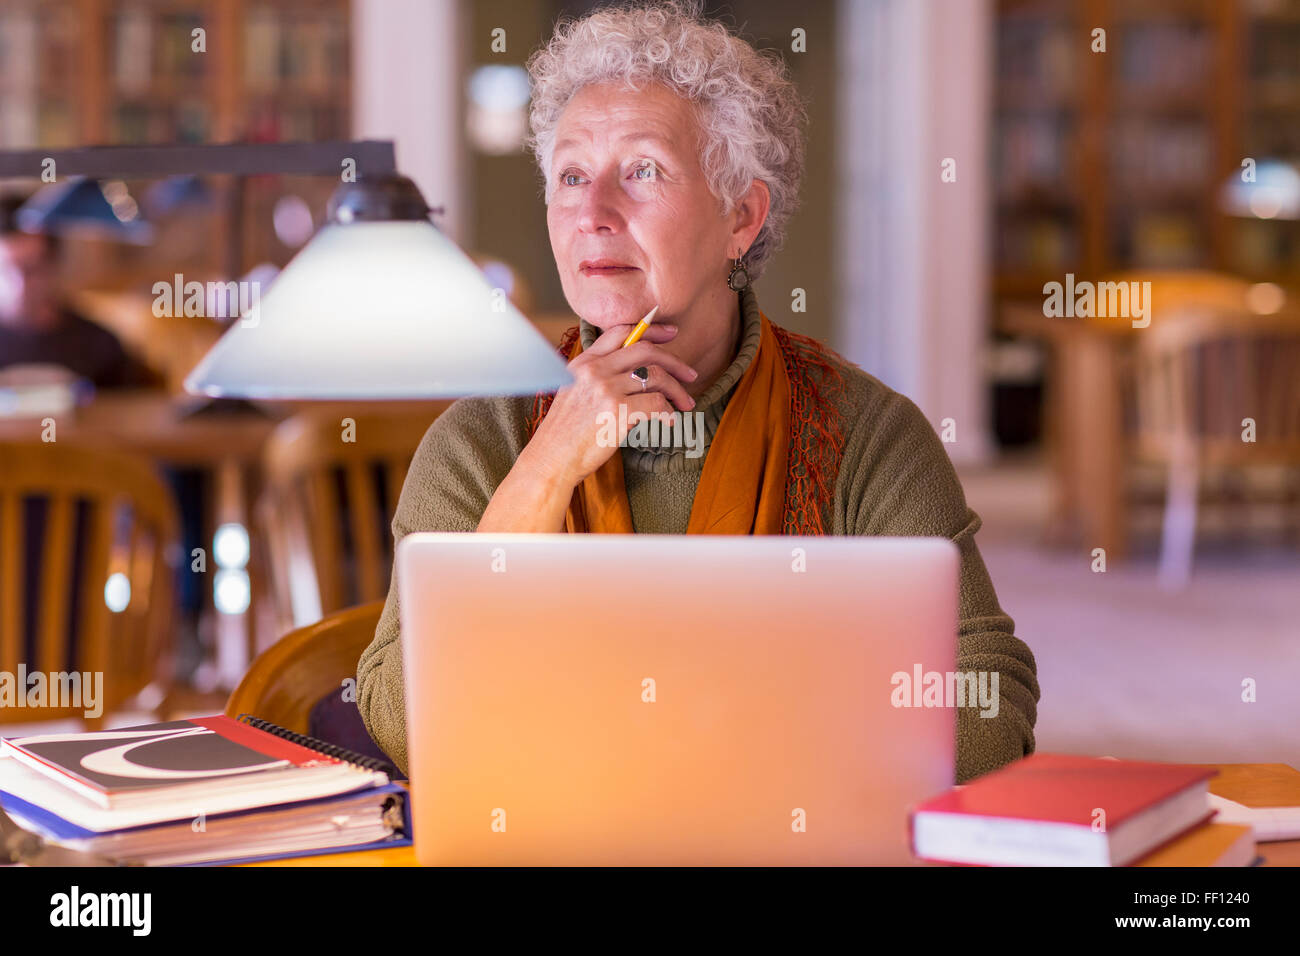 Older mixed race woman using laptop in library Stock Photo